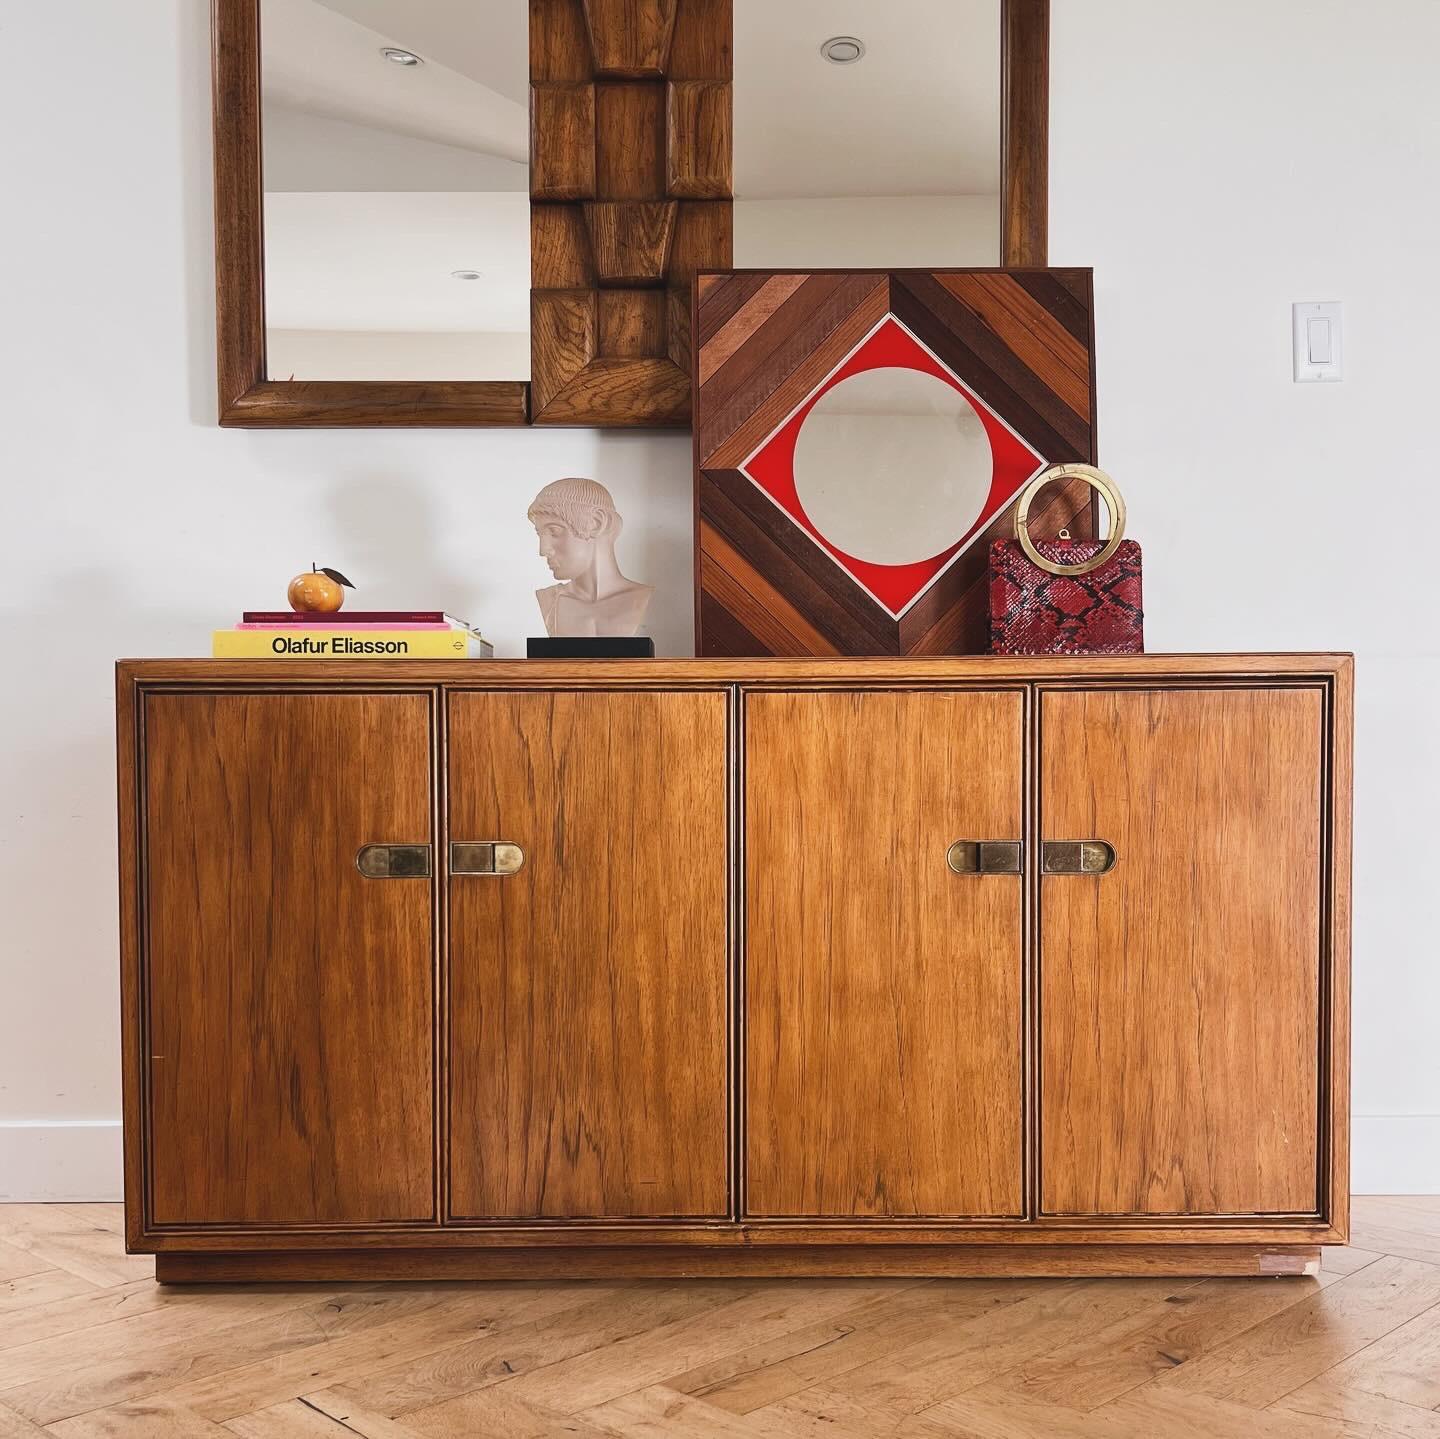  A mid century modern campaign sideboard / buffet / credenza in pecan wood with brass accents by Drexel Heritage Furnishings, circa 1970. Featuring engraved framing along the edges of the facade doors, this piece showcases high mcm design